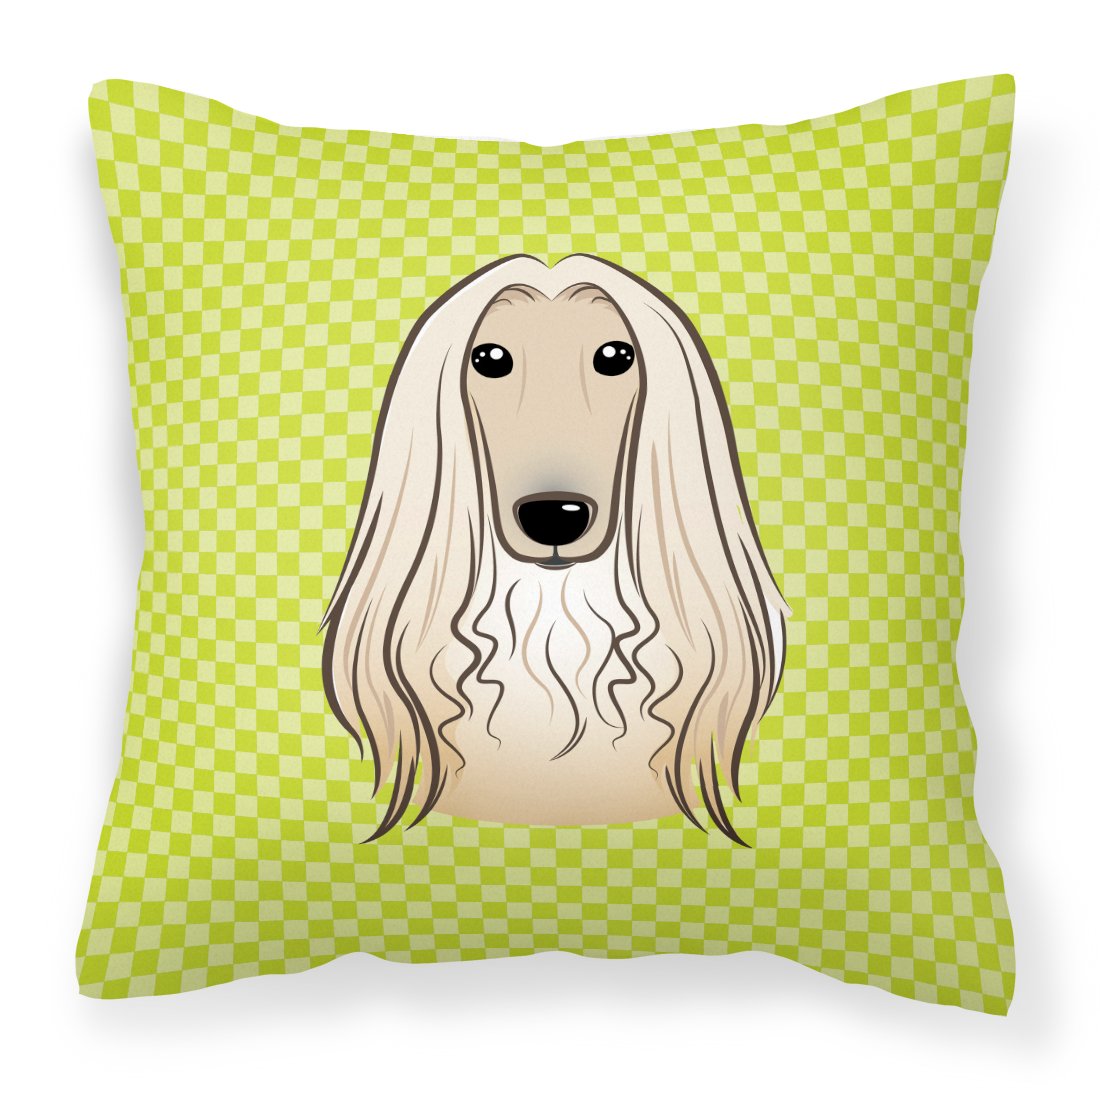 Checkerboard Lime Green Afghan Hound Canvas Fabric Decorative Pillow by Caroline's Treasures